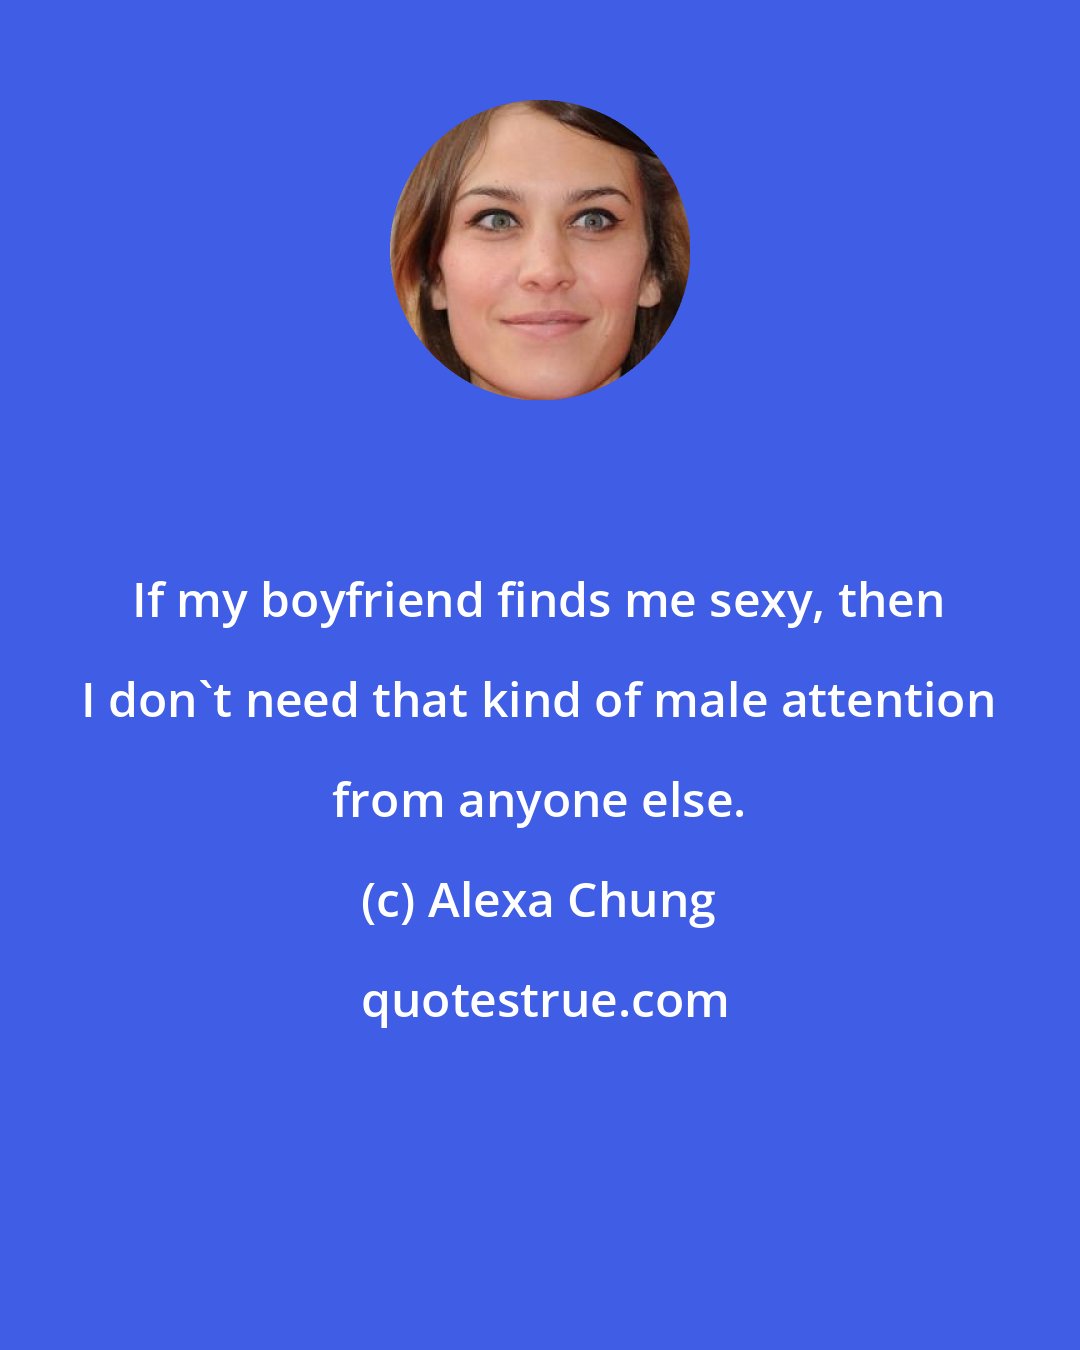 Alexa Chung: If my boyfriend finds me sexy, then I don't need that kind of male attention from anyone else.